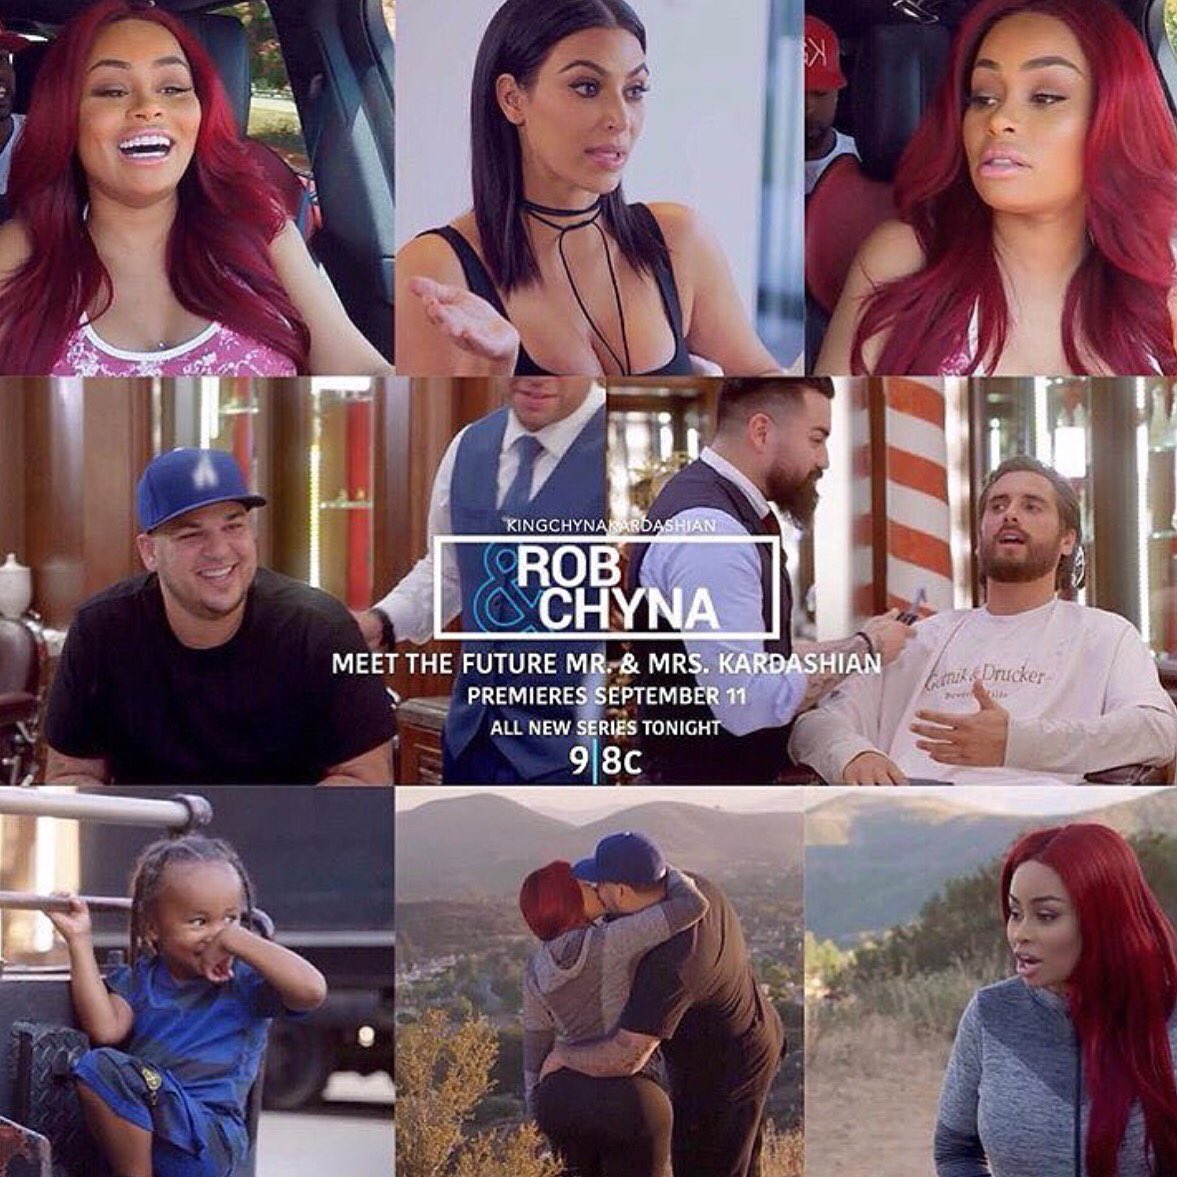 RT @KrisJenner: 45 mins to go, east coast!! #RobandChyna 9pm!! Find out if @robkardashian and @blacchyna are having a boy or a girl! https:…